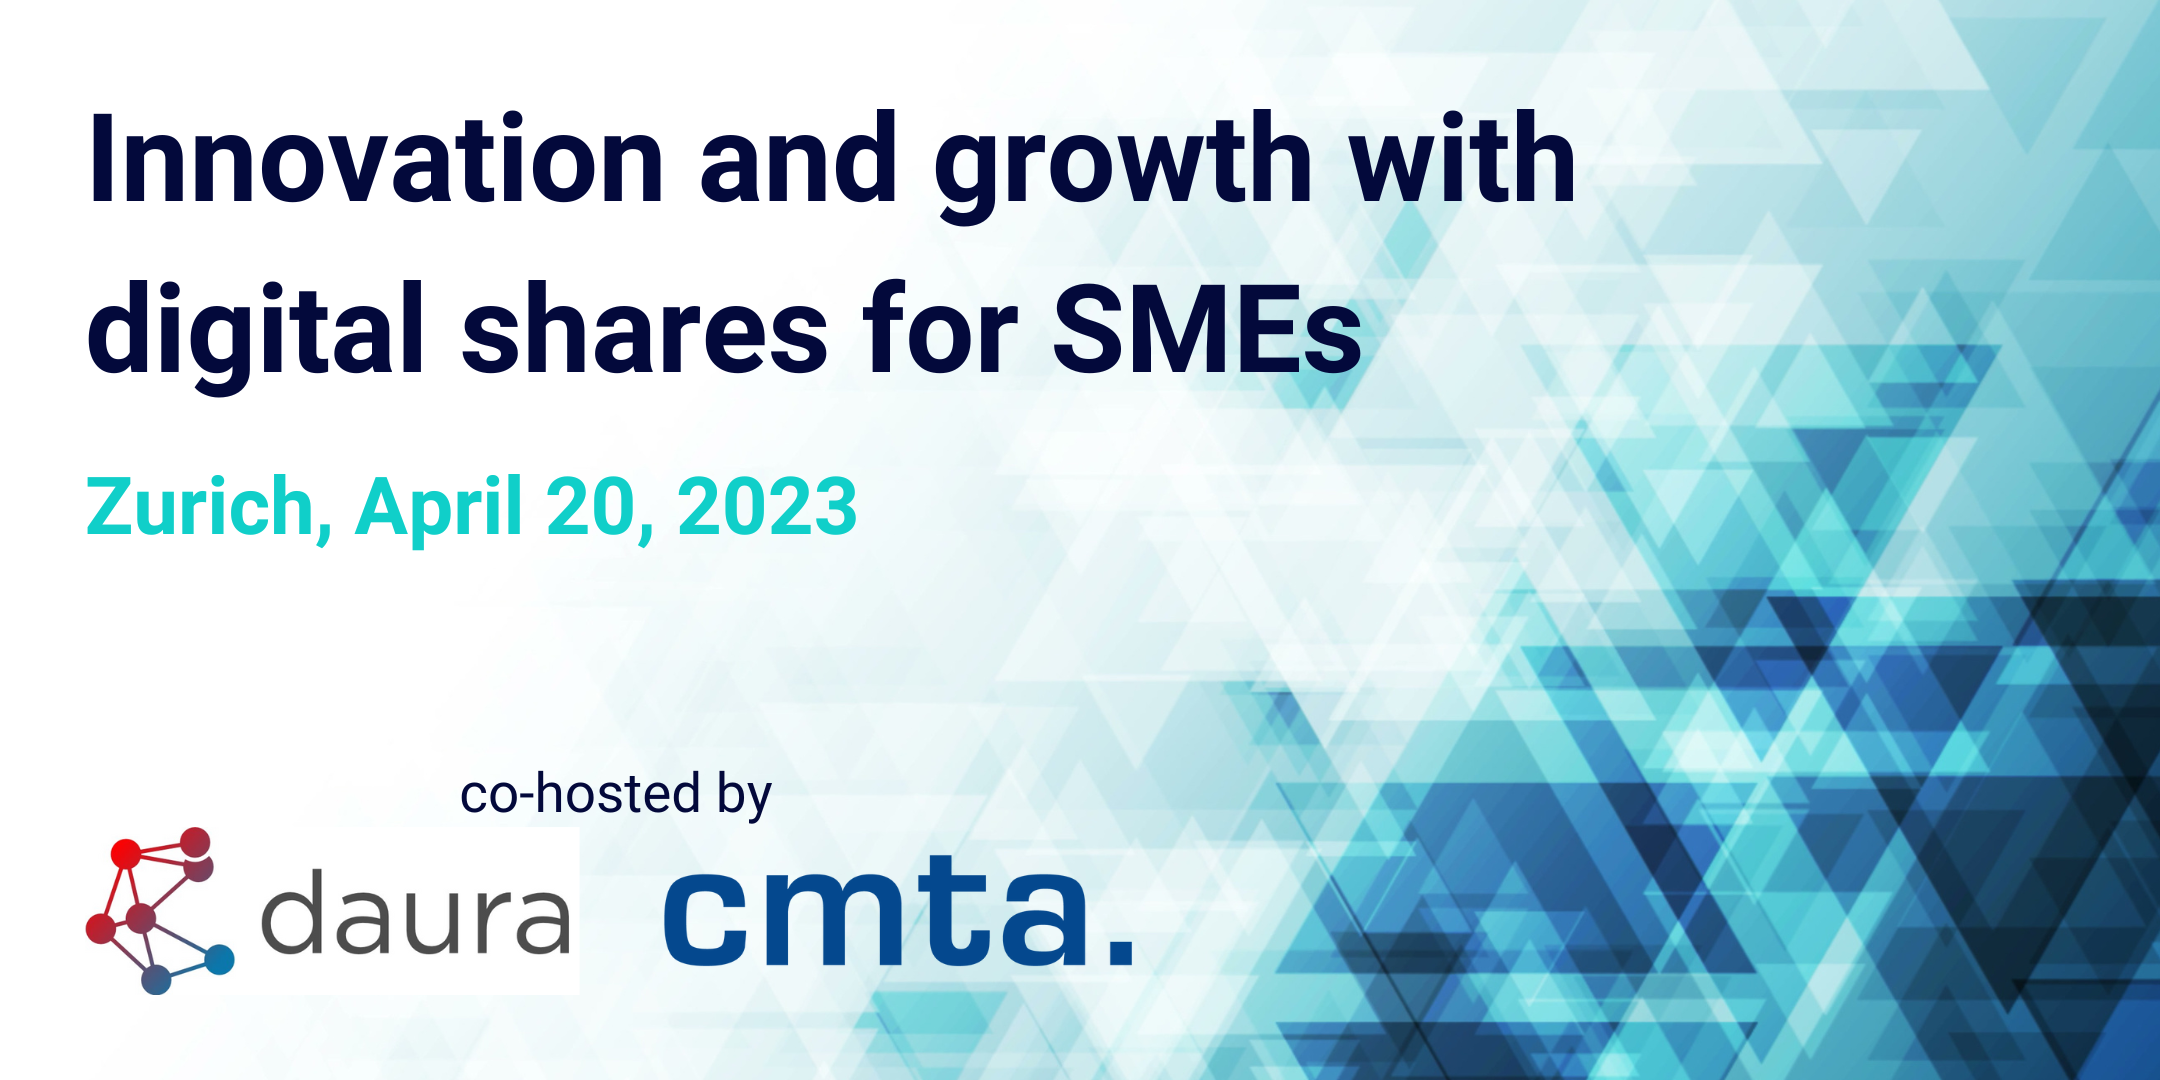 Event: Innovation and growth with digital shares for SMEs